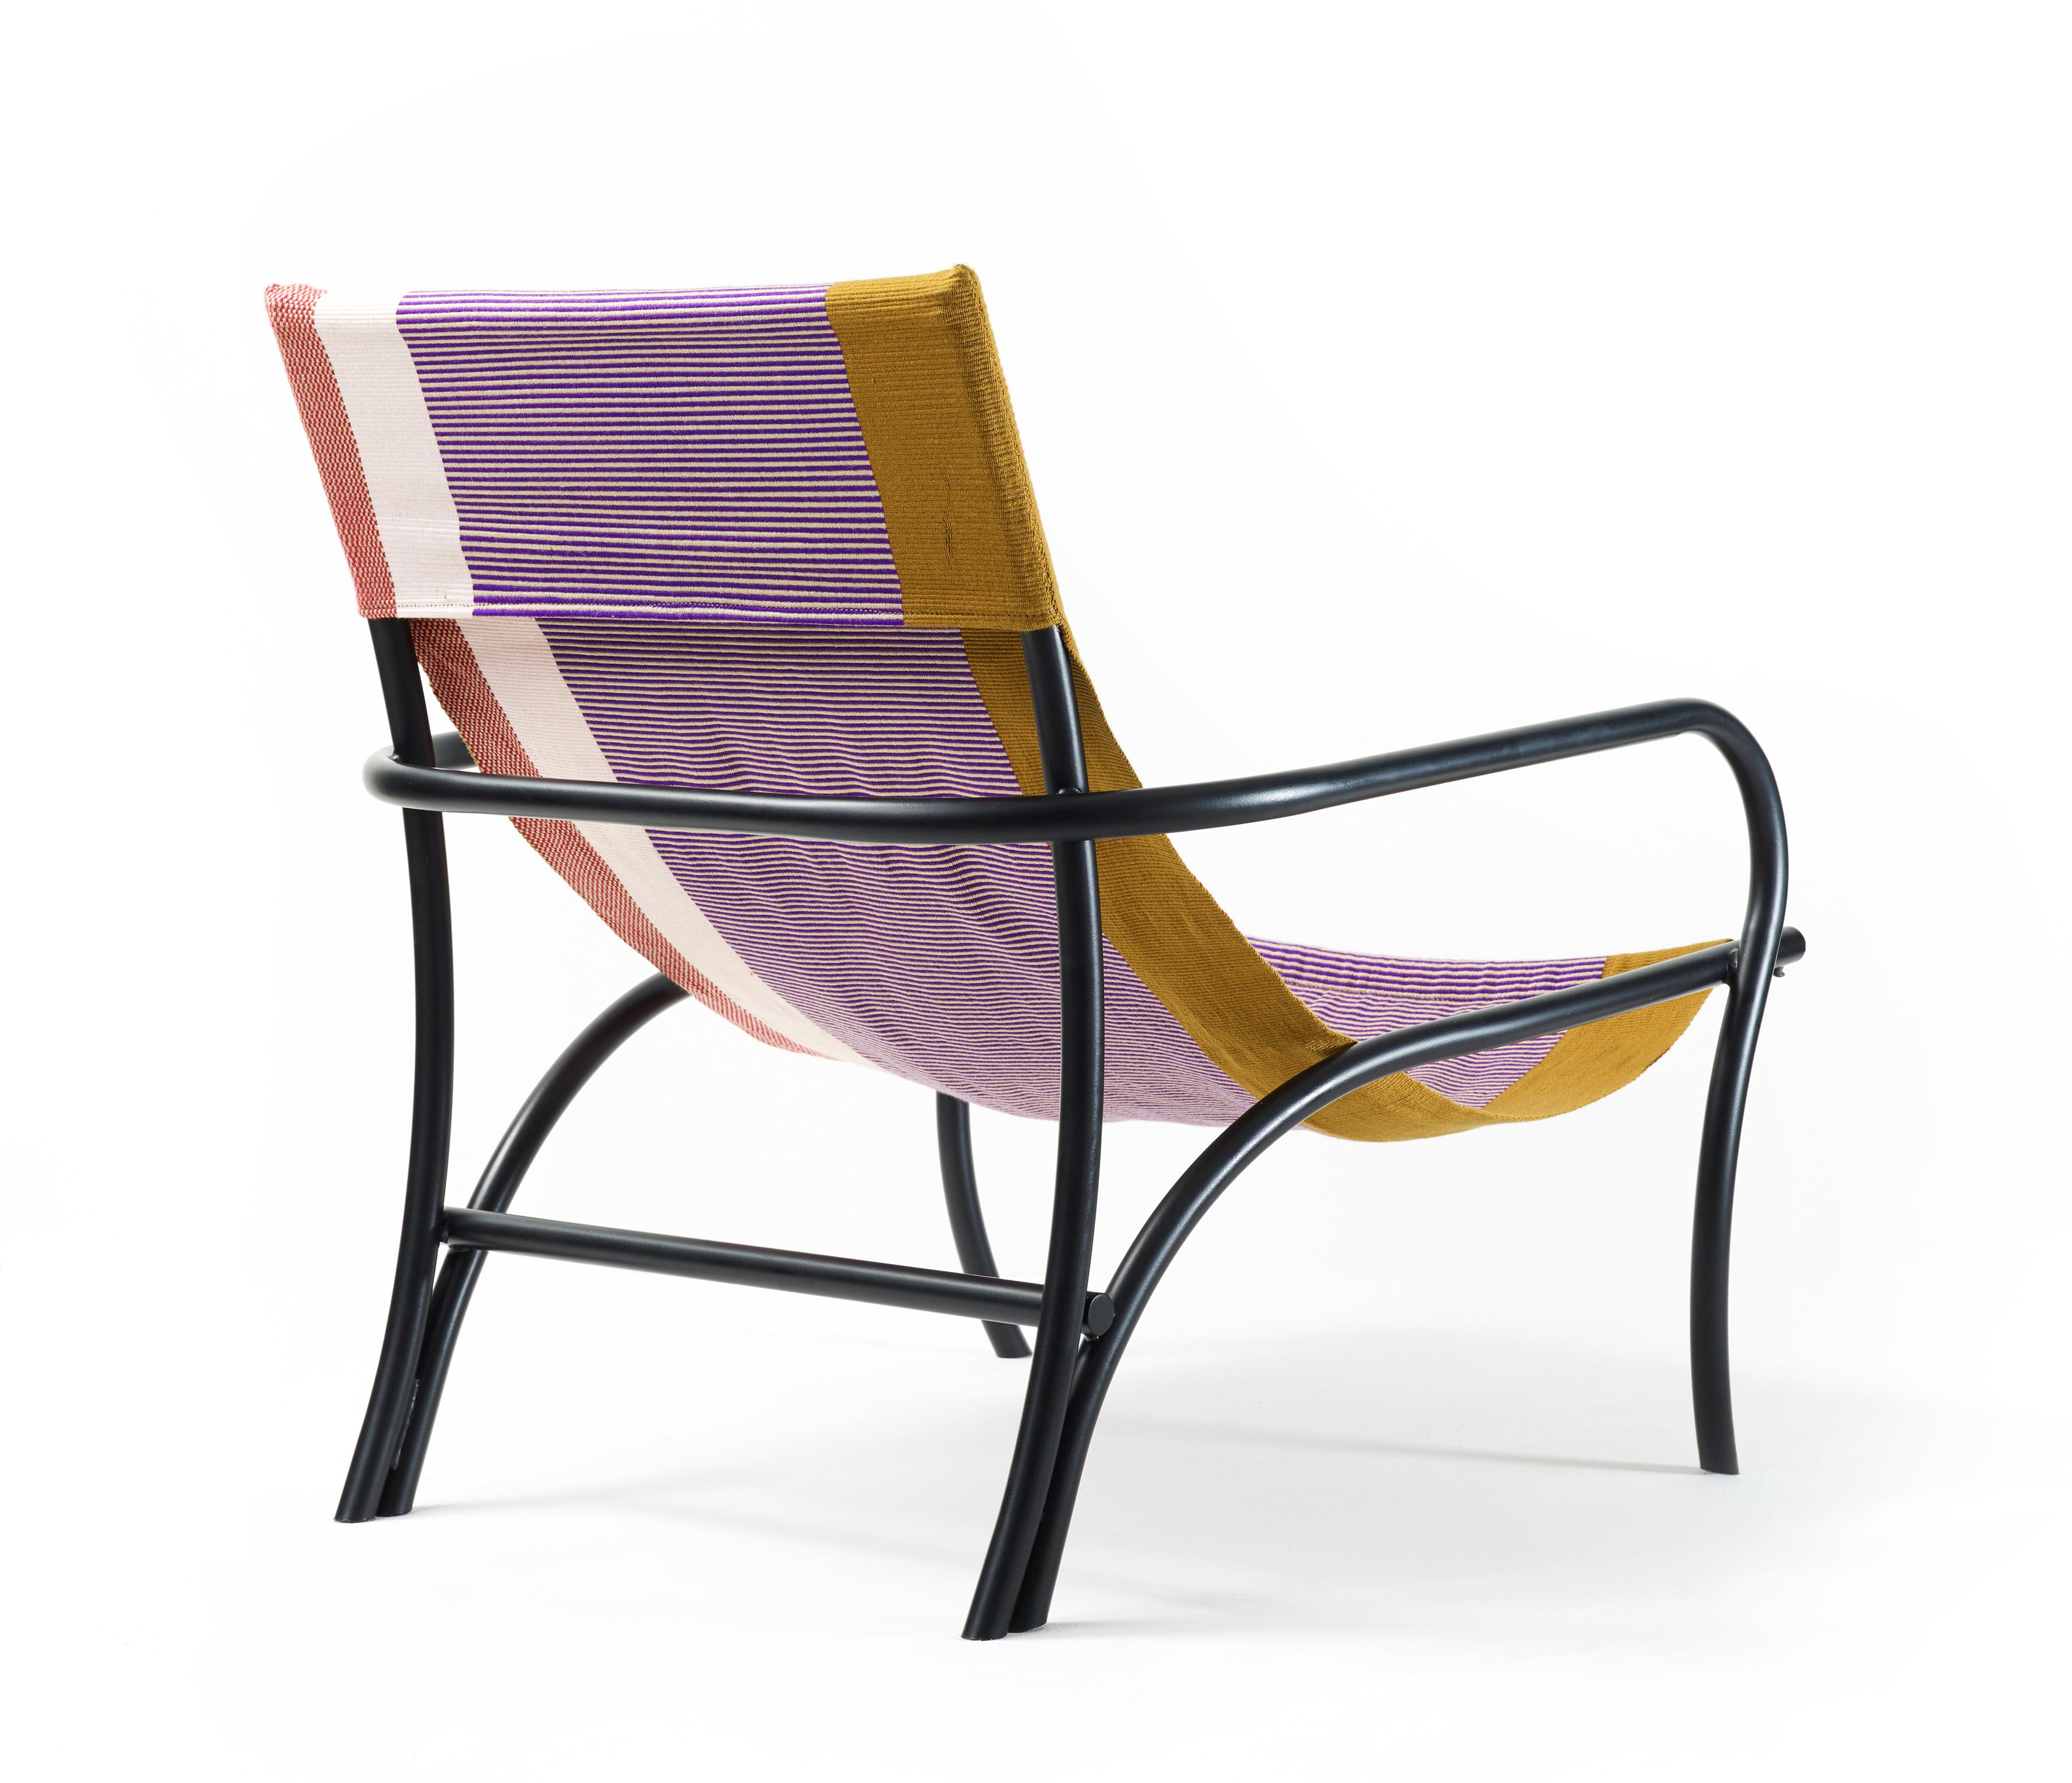 Set of 2 Dorado/purple Maraca lounge chair by Sebastian Herkner
Materials: Galvanized and powder-coated tubular steel. 100% cotton. 
Technique: hand-woven with 100% cotton yarns.
Dimensions: W 72.7 x D 86.7 x H 88.5 cm 
Available in colors: